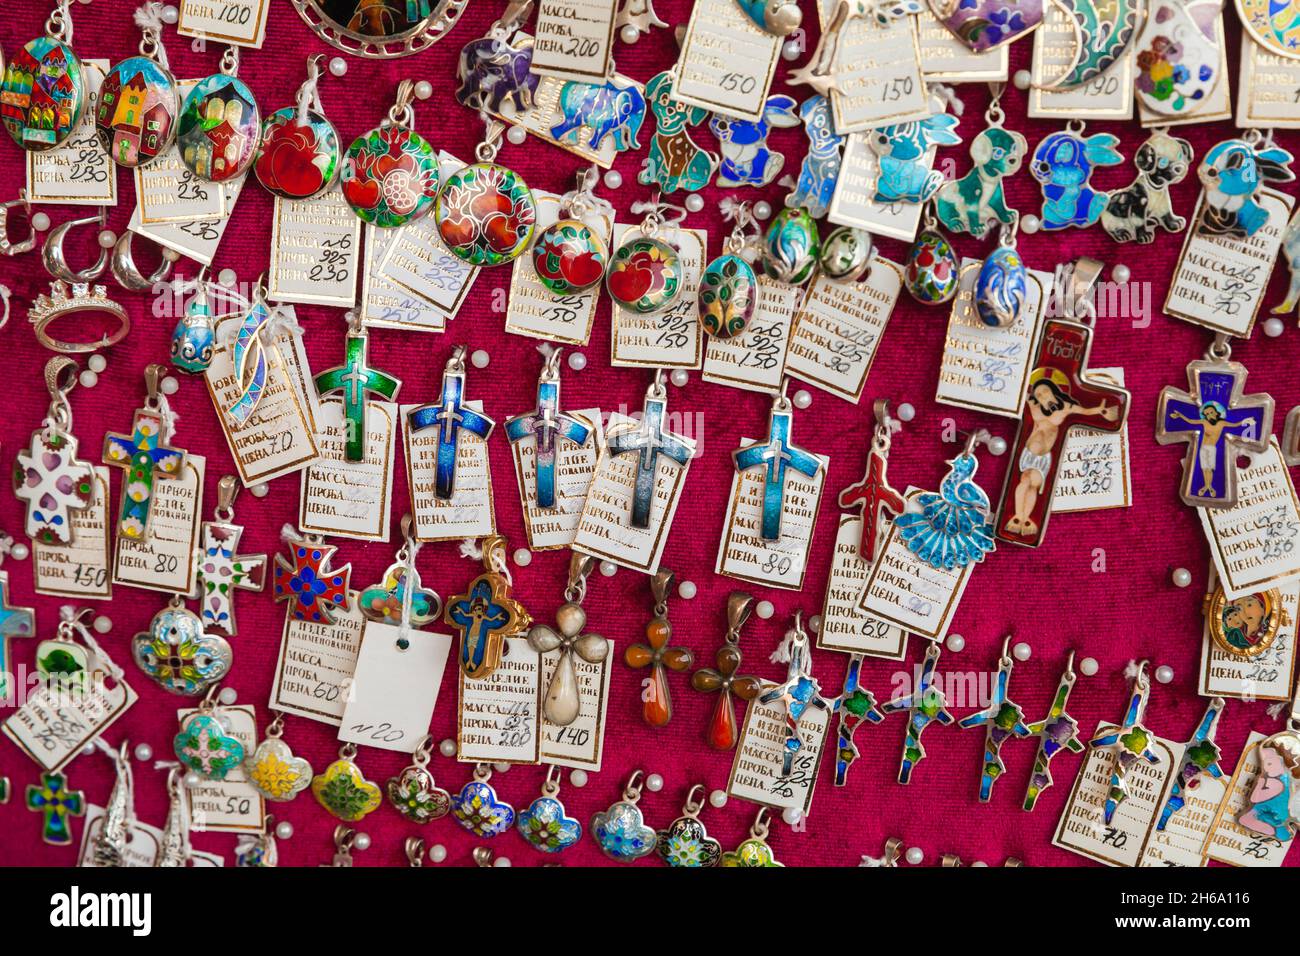 Tbilisi, Georgia - April 28, 2019: Handmade jewelry made by Minankari or cloisonne enamel is on a counter of a local gift shop. This jewelry technique Stock Photo